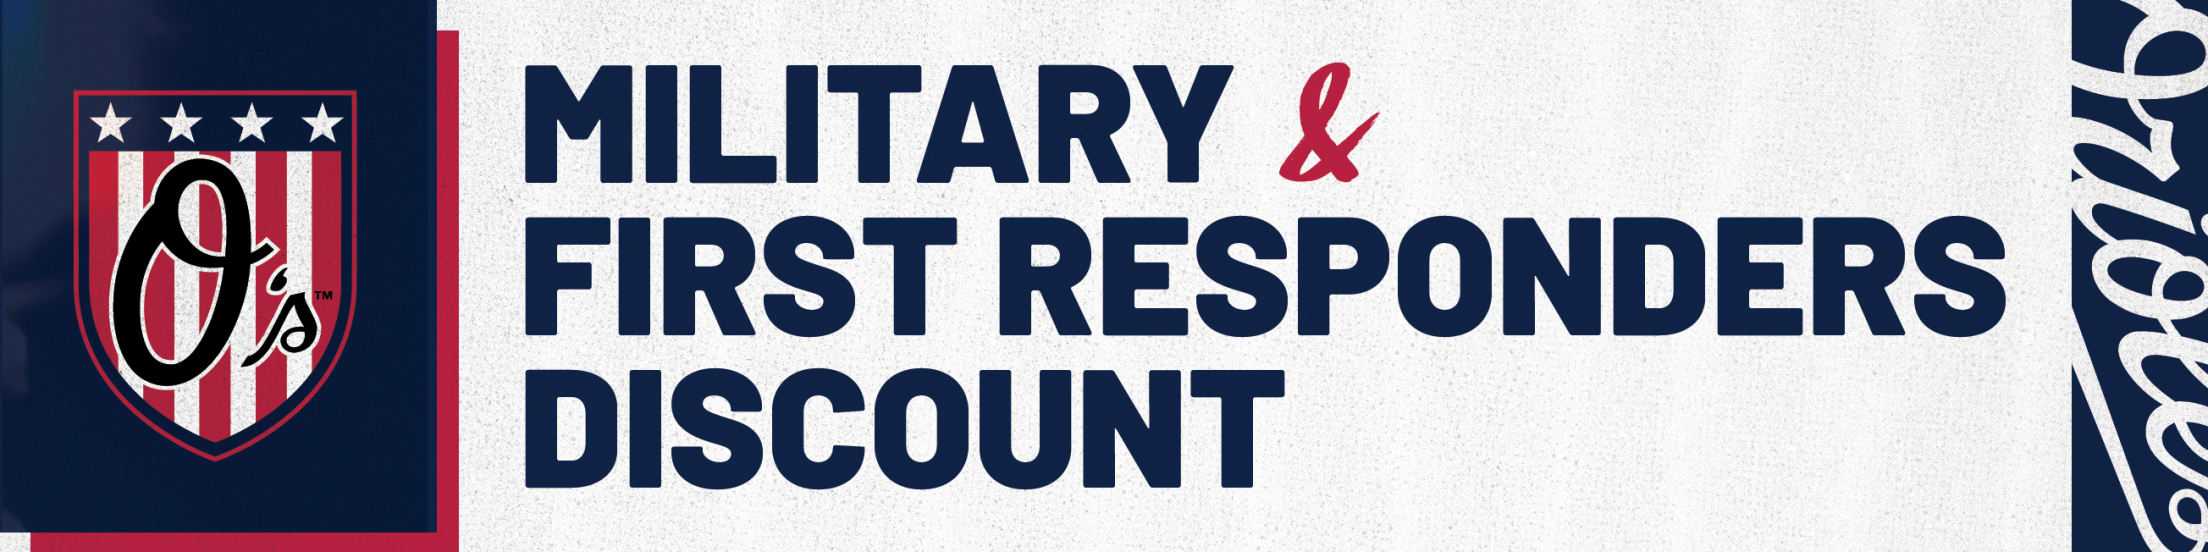 Military Discounts, First Responder Discounts